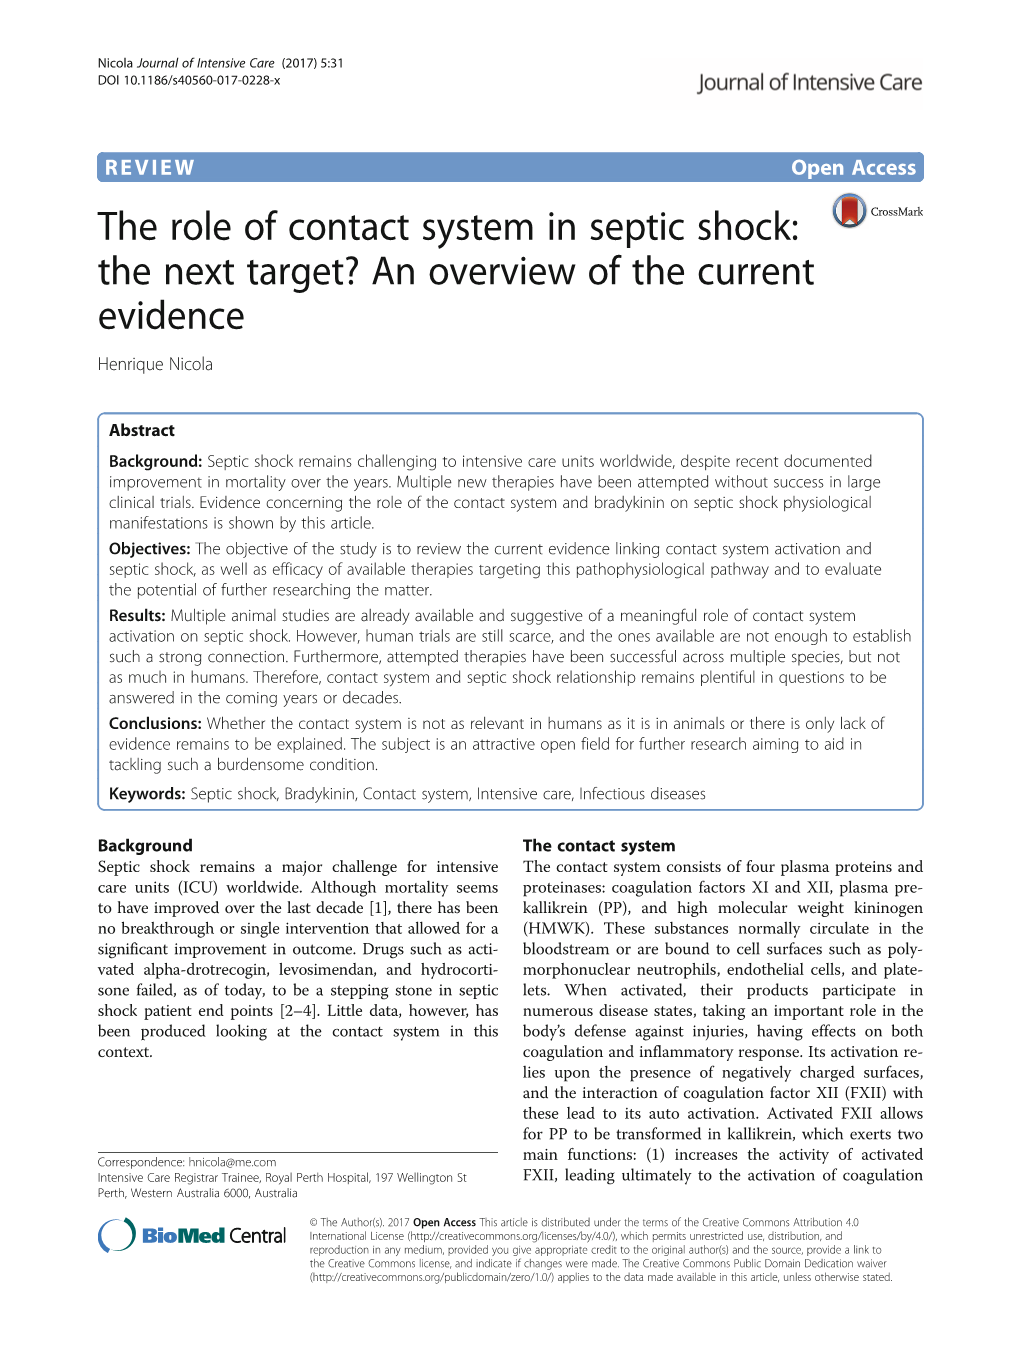 The Role of Contact System in Septic Shock: the Next Target? an Overview of the Current Evidence Henrique Nicola